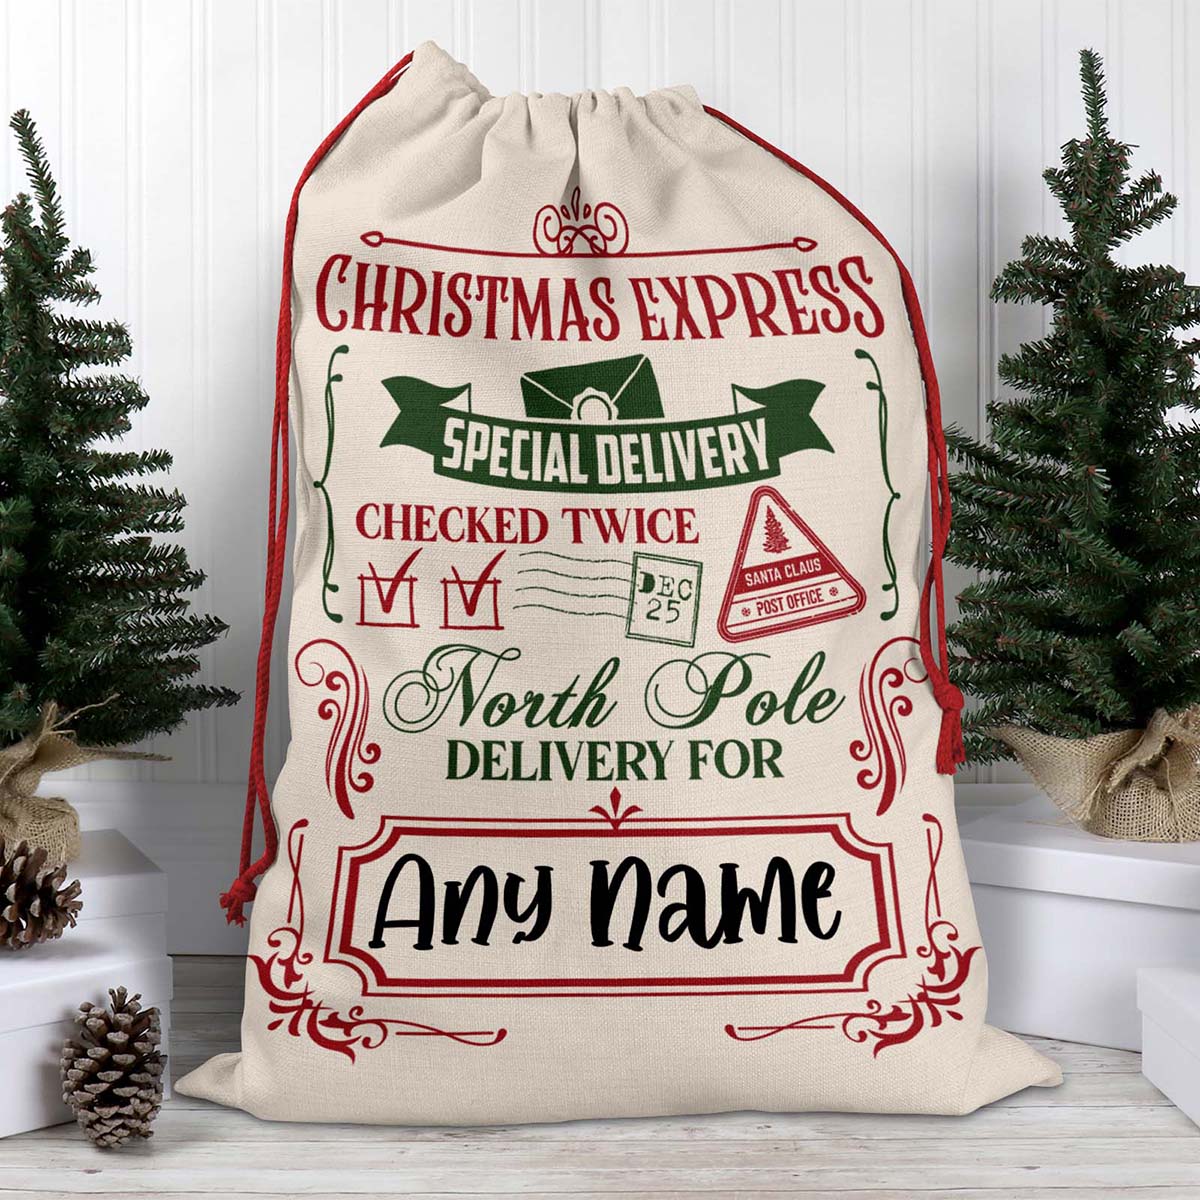 Christmas Express Special Delivery v2 Personalized Christmas Gift Delivery SackCustomly Gifts